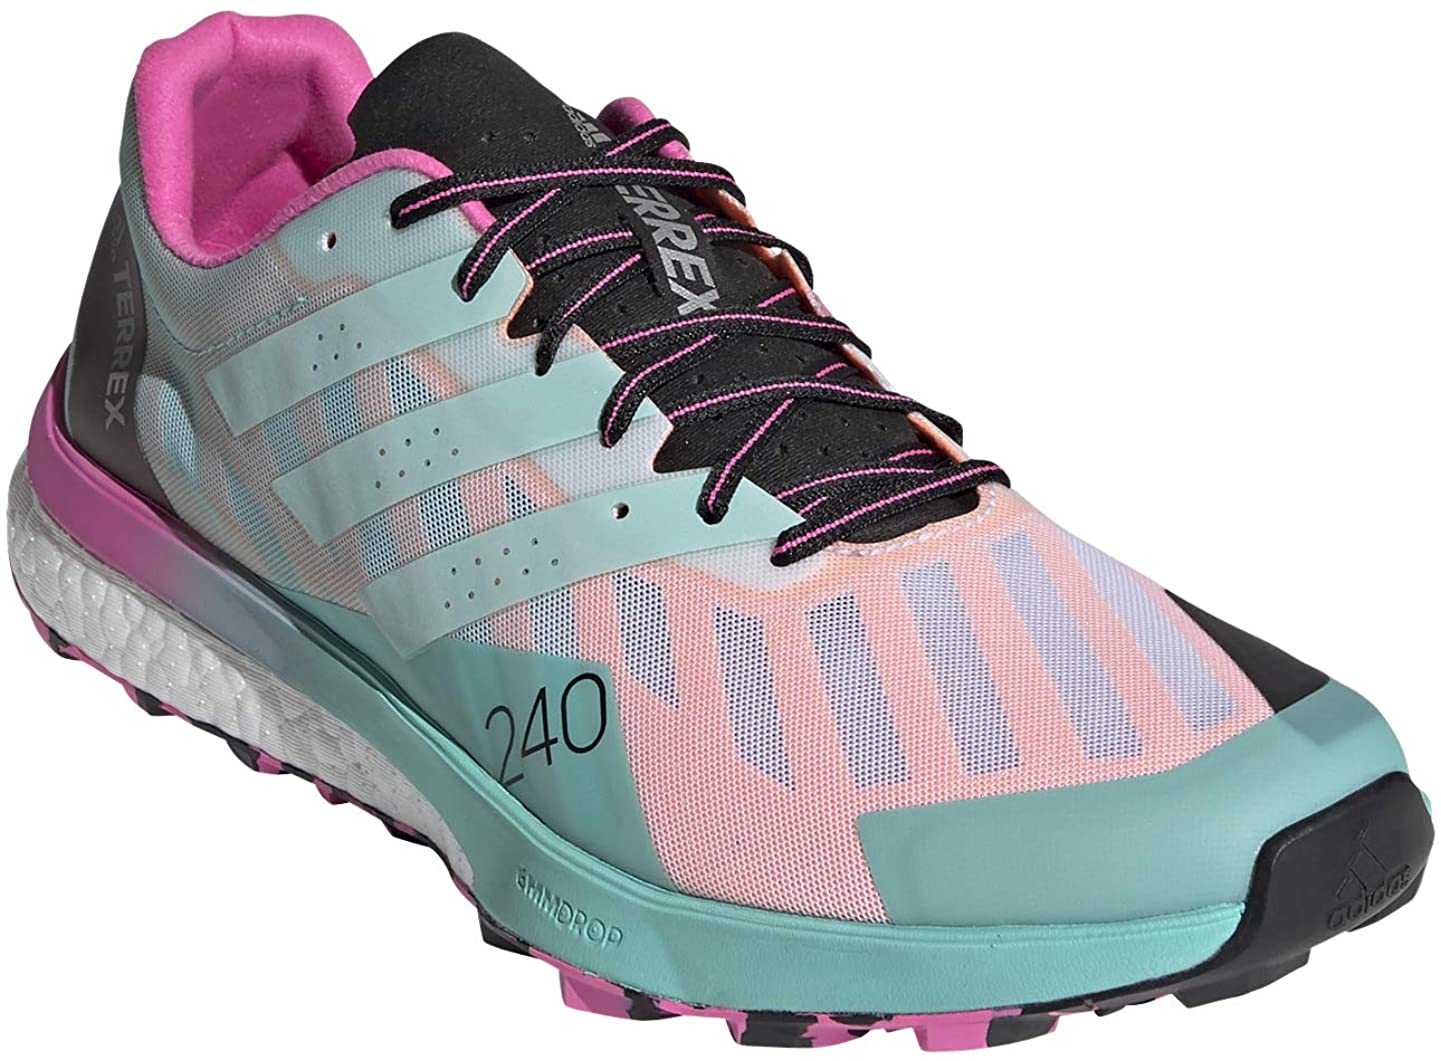 Men's adidas Terrex Speed Ultra Trail Running Shoe Cloud White/Clear Mint/Screaming Pink from the front